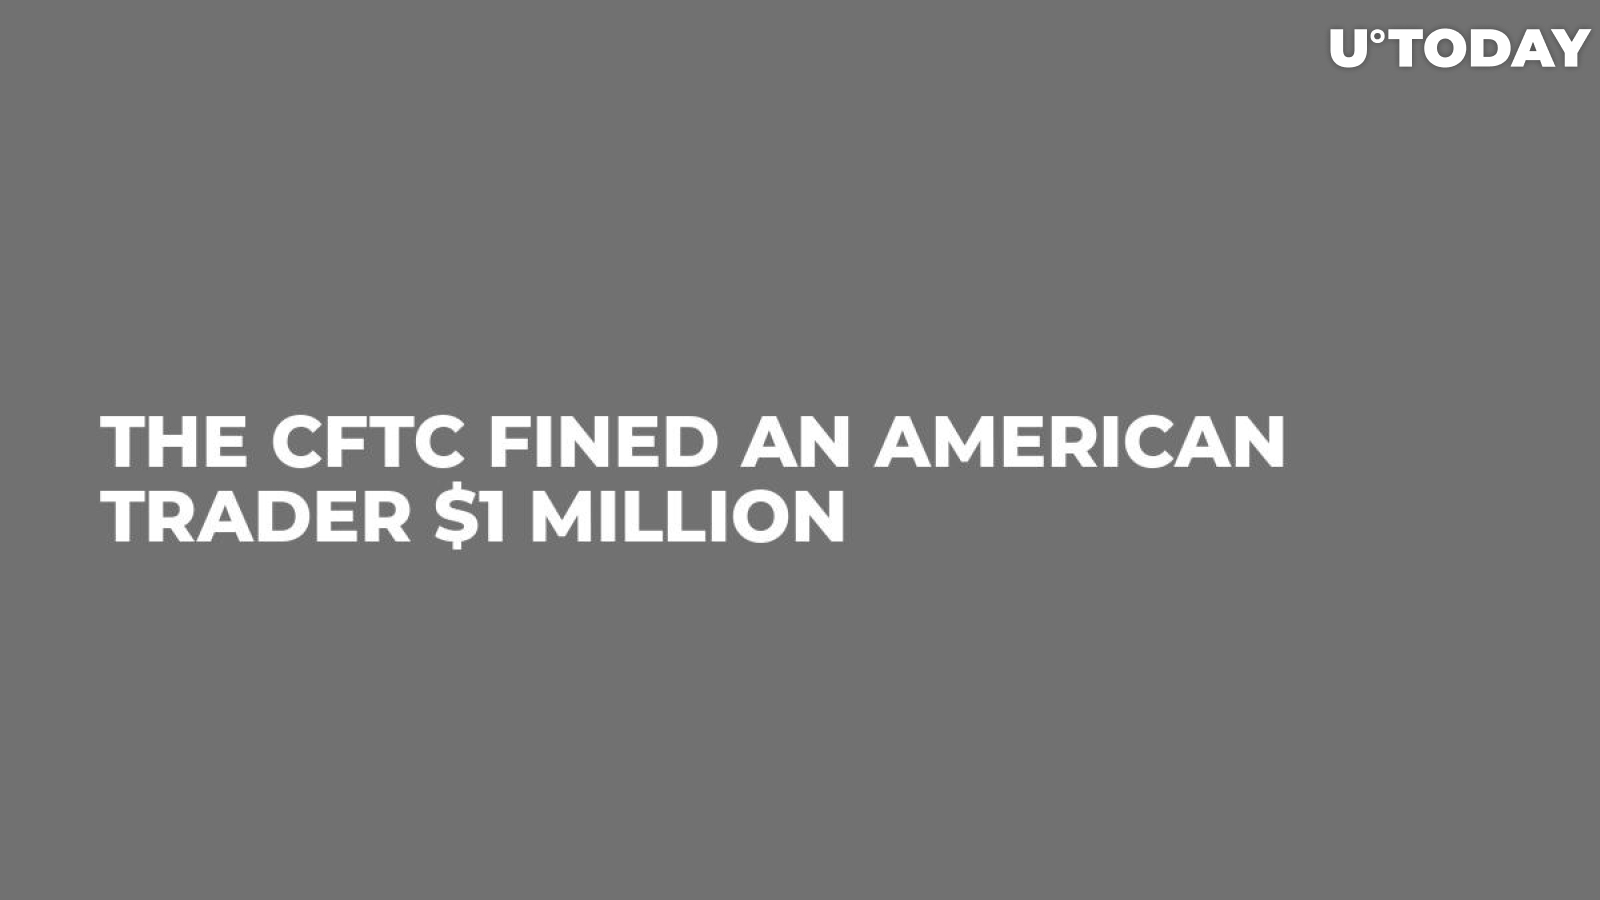 The CFTC Fined an American Trader $1 Million